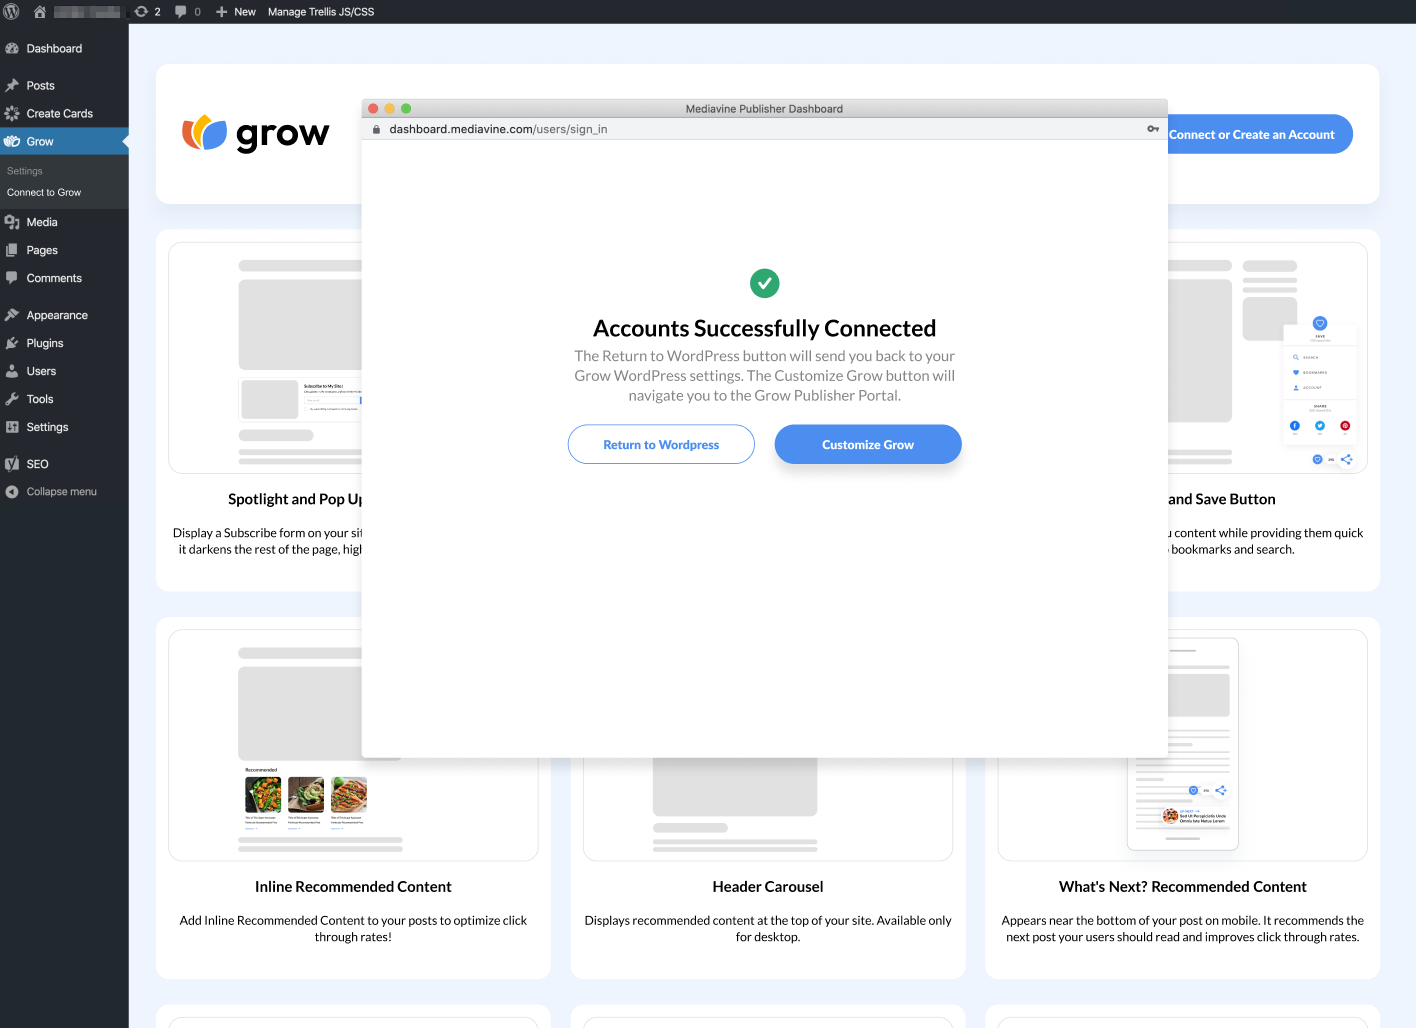 That's it! You can now customize your new Grow account!